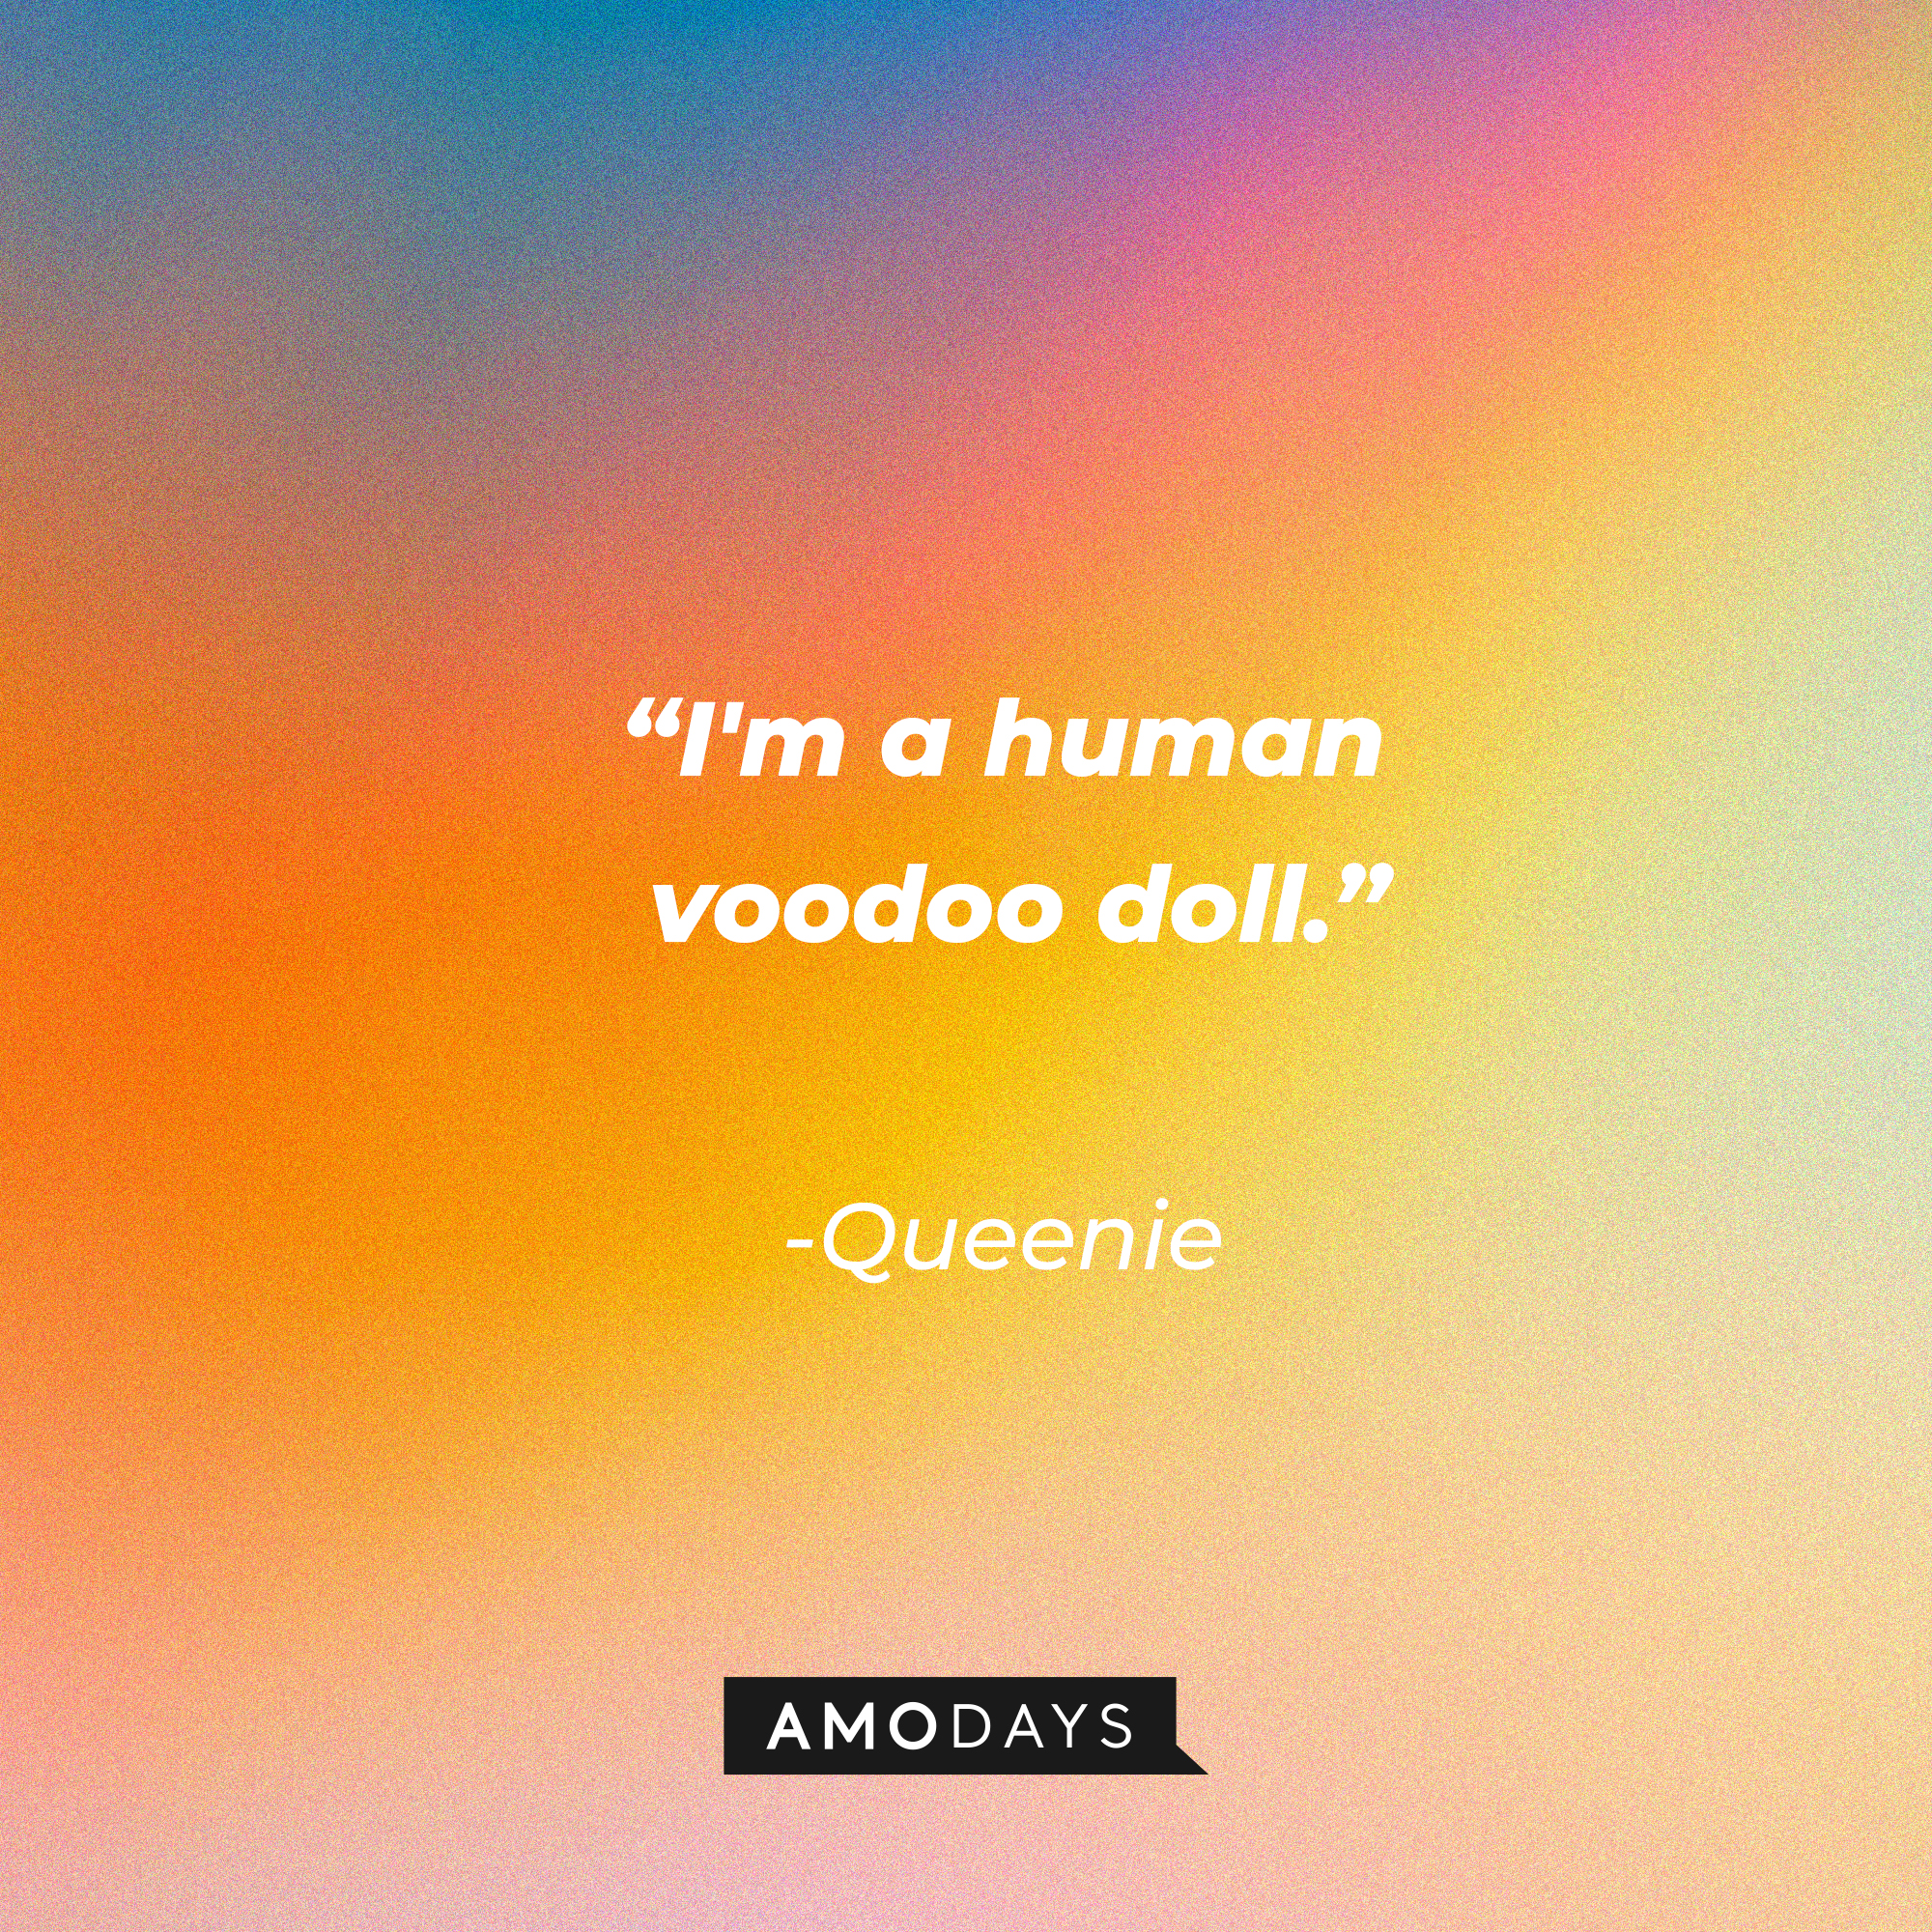 Queenie’s quote: “I'm a human voodoo doll.” | Source: AmoDays